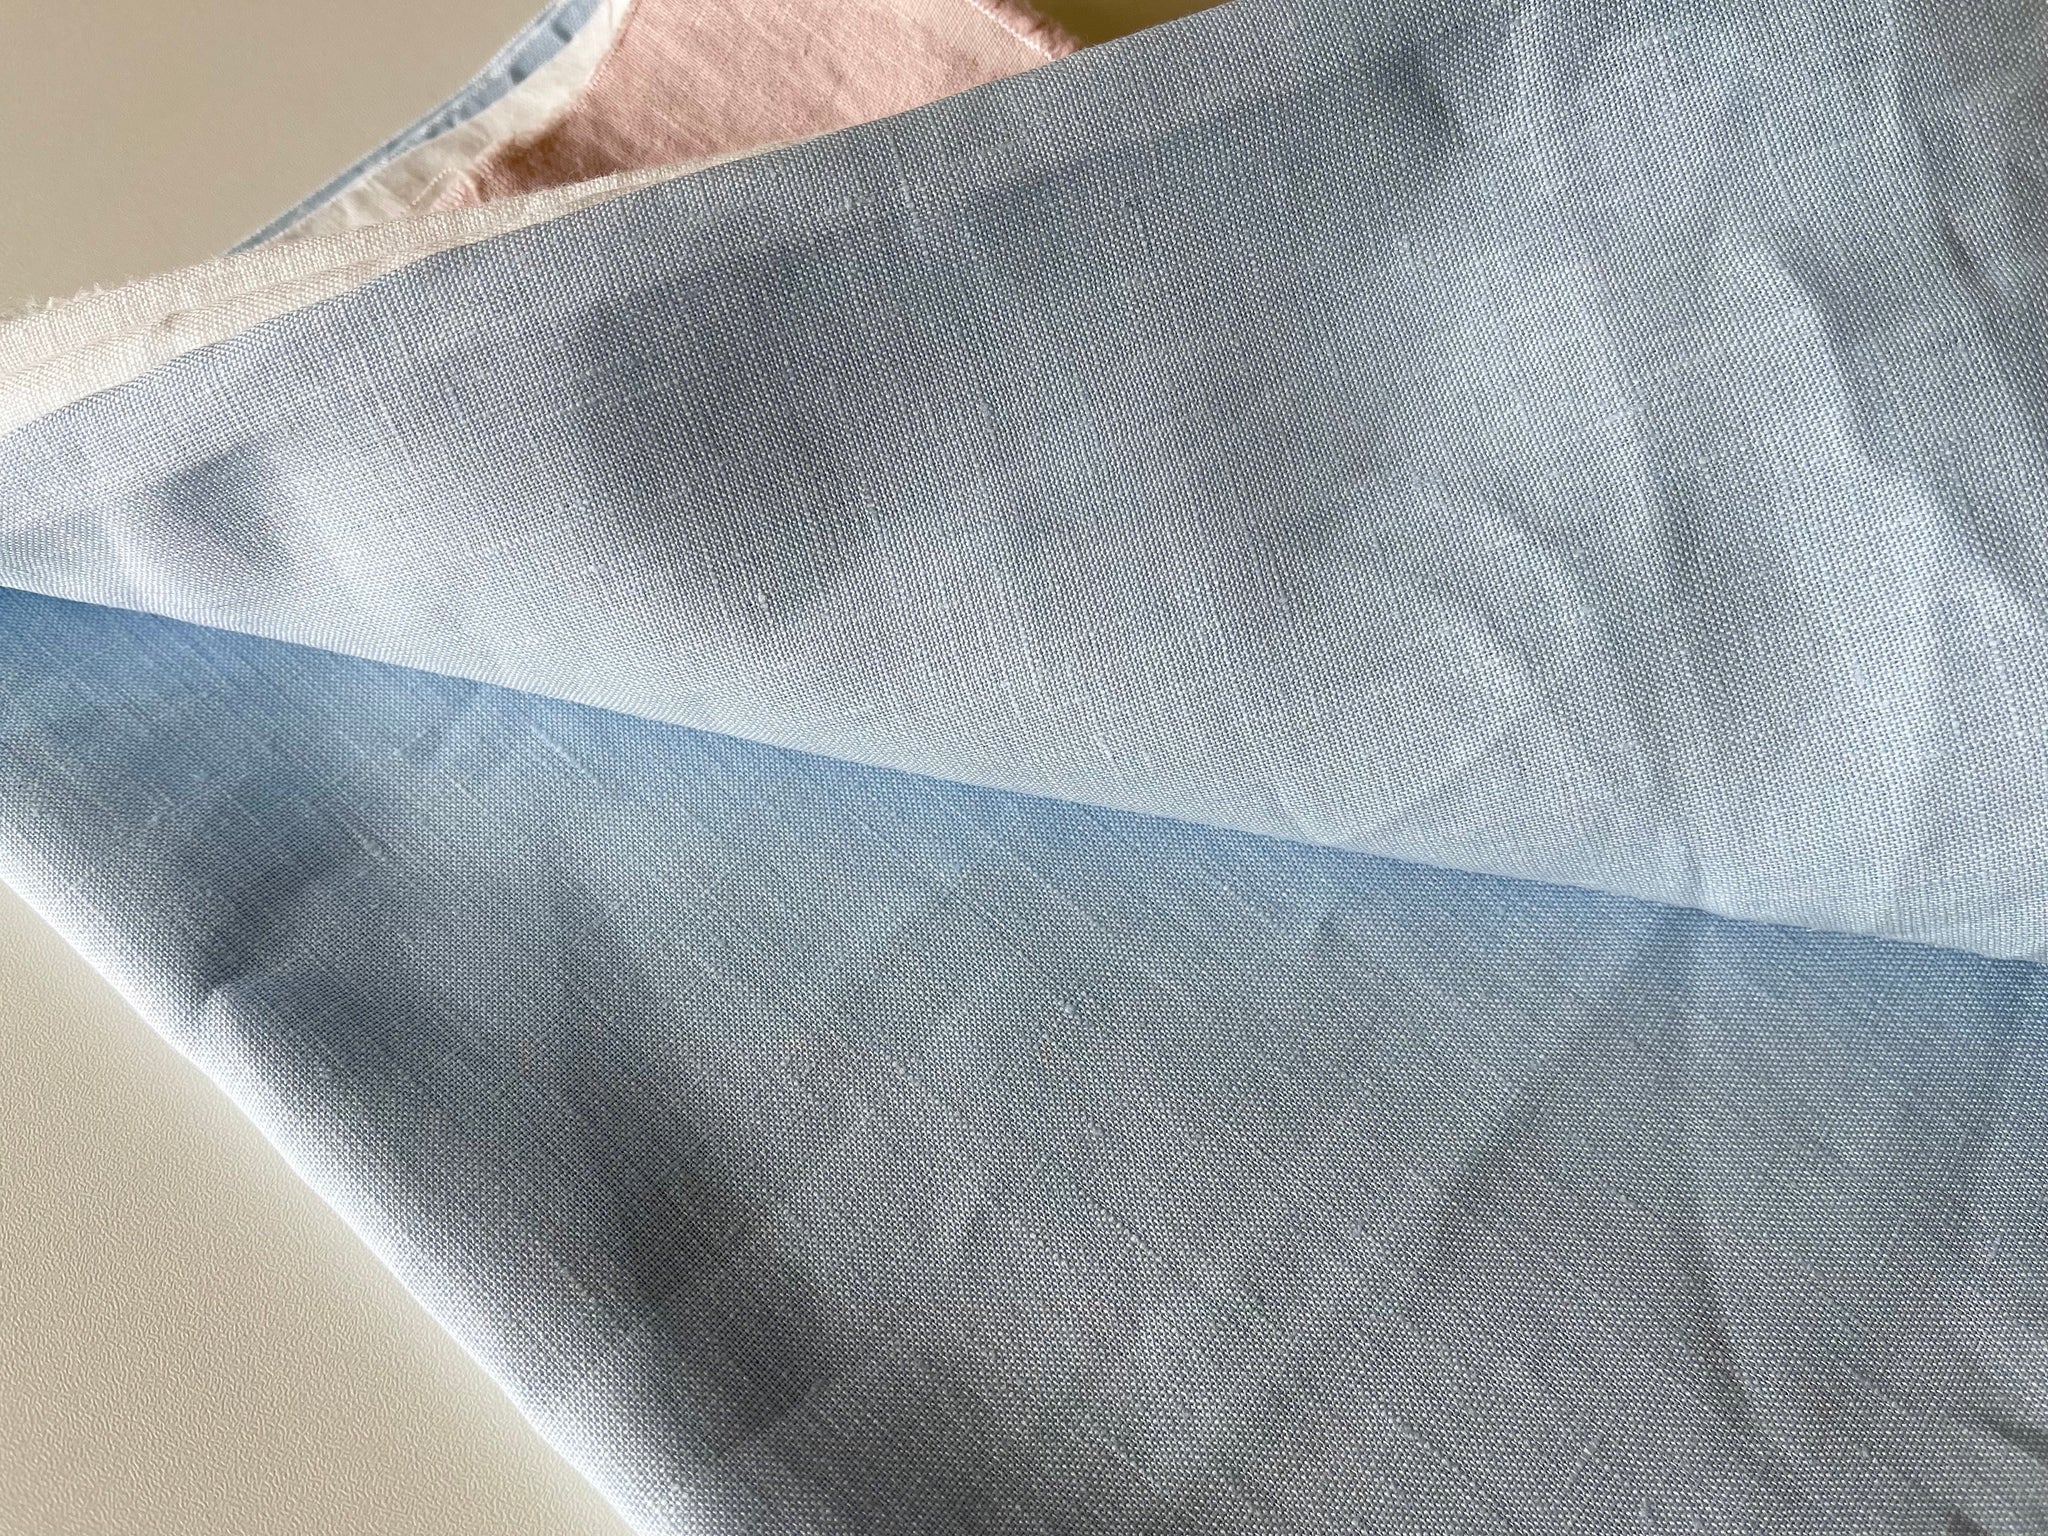 Linen Fabric Remnants - Dusty Rose, Pure White, Light Blue